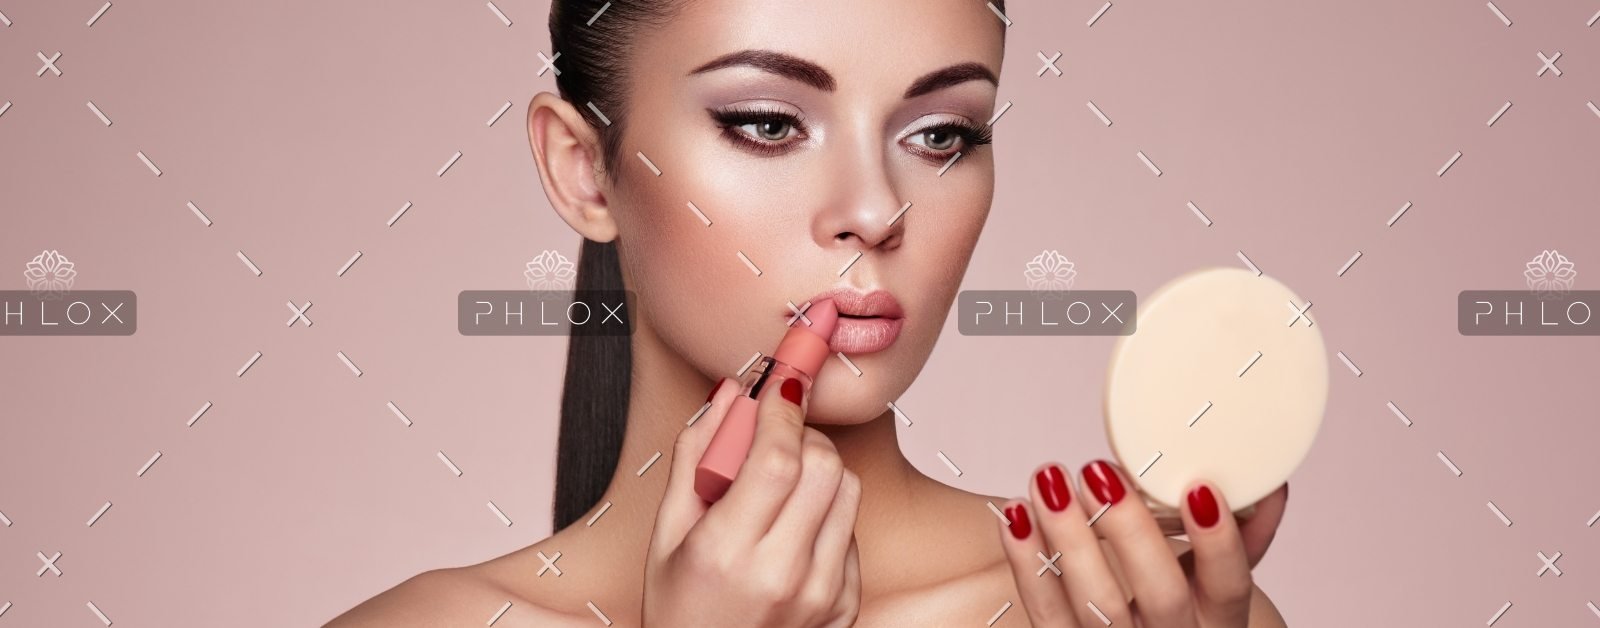 demo-attachment-551-beautiful-woman-paints-lips-with-lipstick-PMB6YWP-1